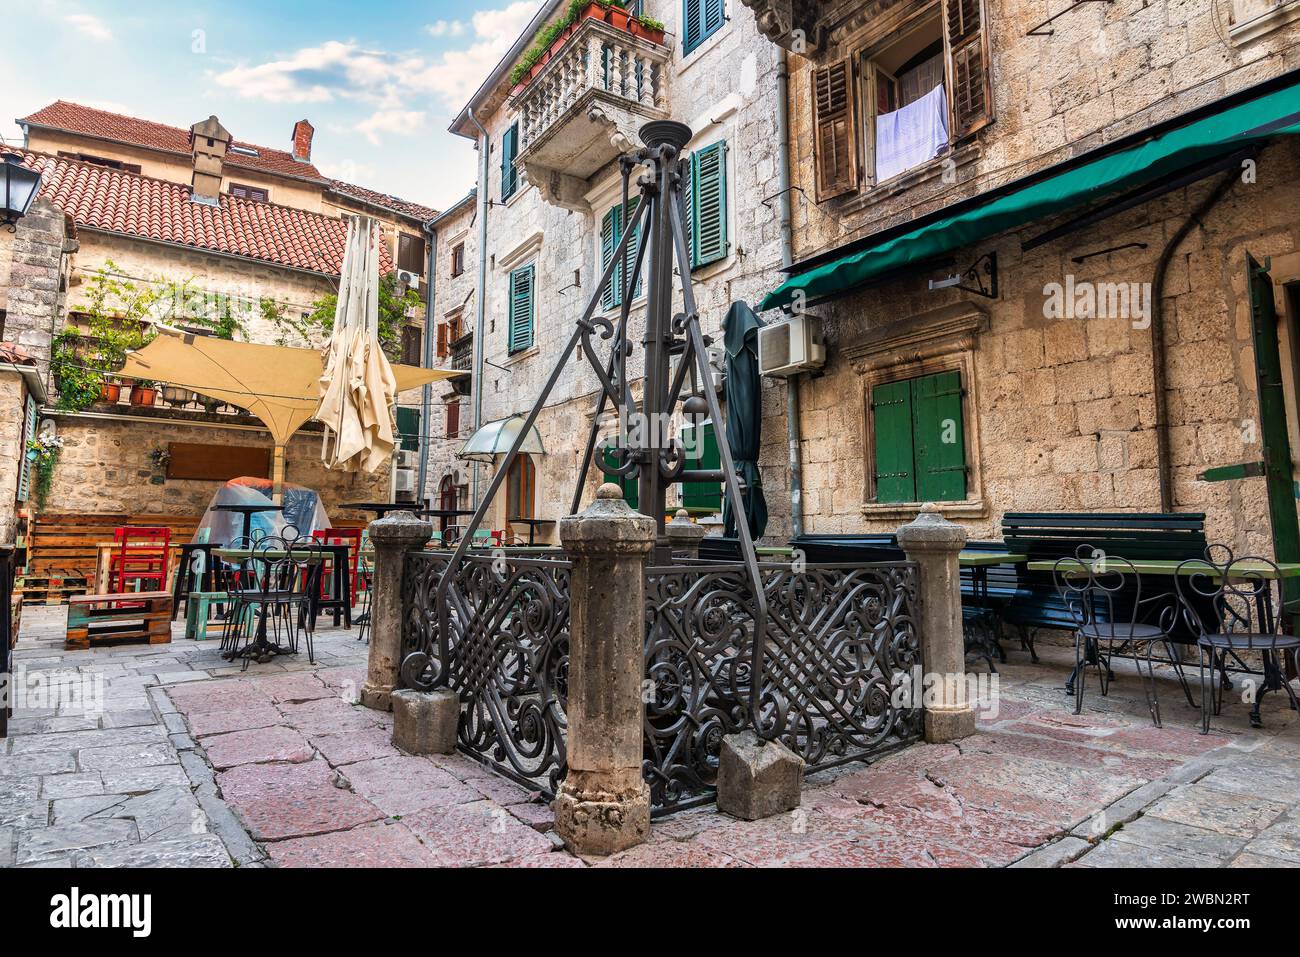 Ancient water well in the Old town of Kotor, Montenegro Stock Photo